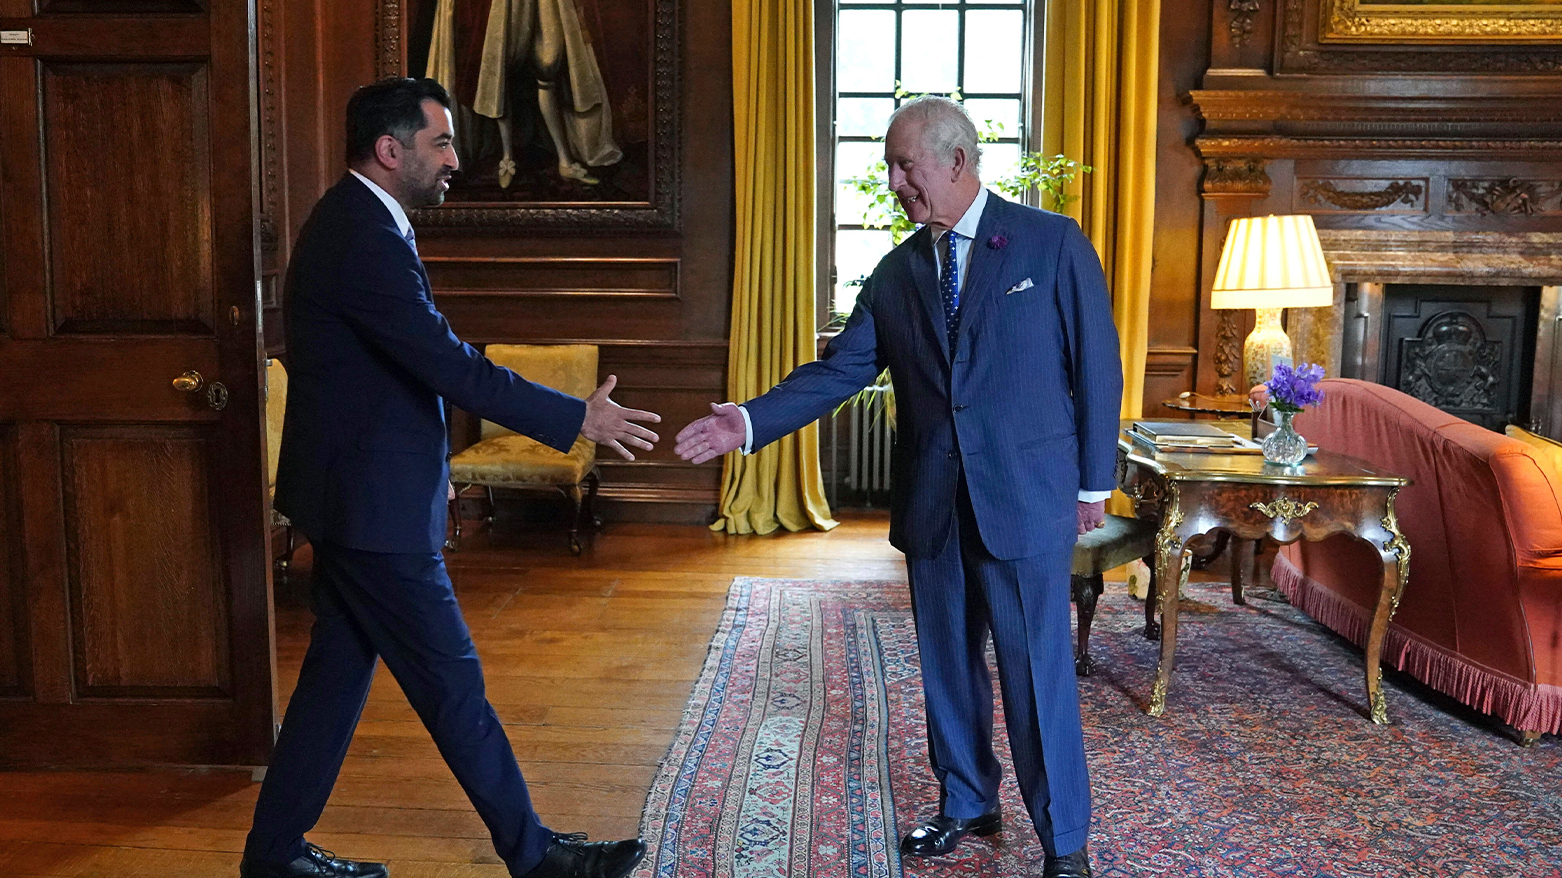 Britain's King Charles III, right, receives Scotland's First Minister Humza Yousaf during an audience at the Palace of Holyroodhouse in Edinburgh, Tuesday, July 4, 2023. (Photo: AP)